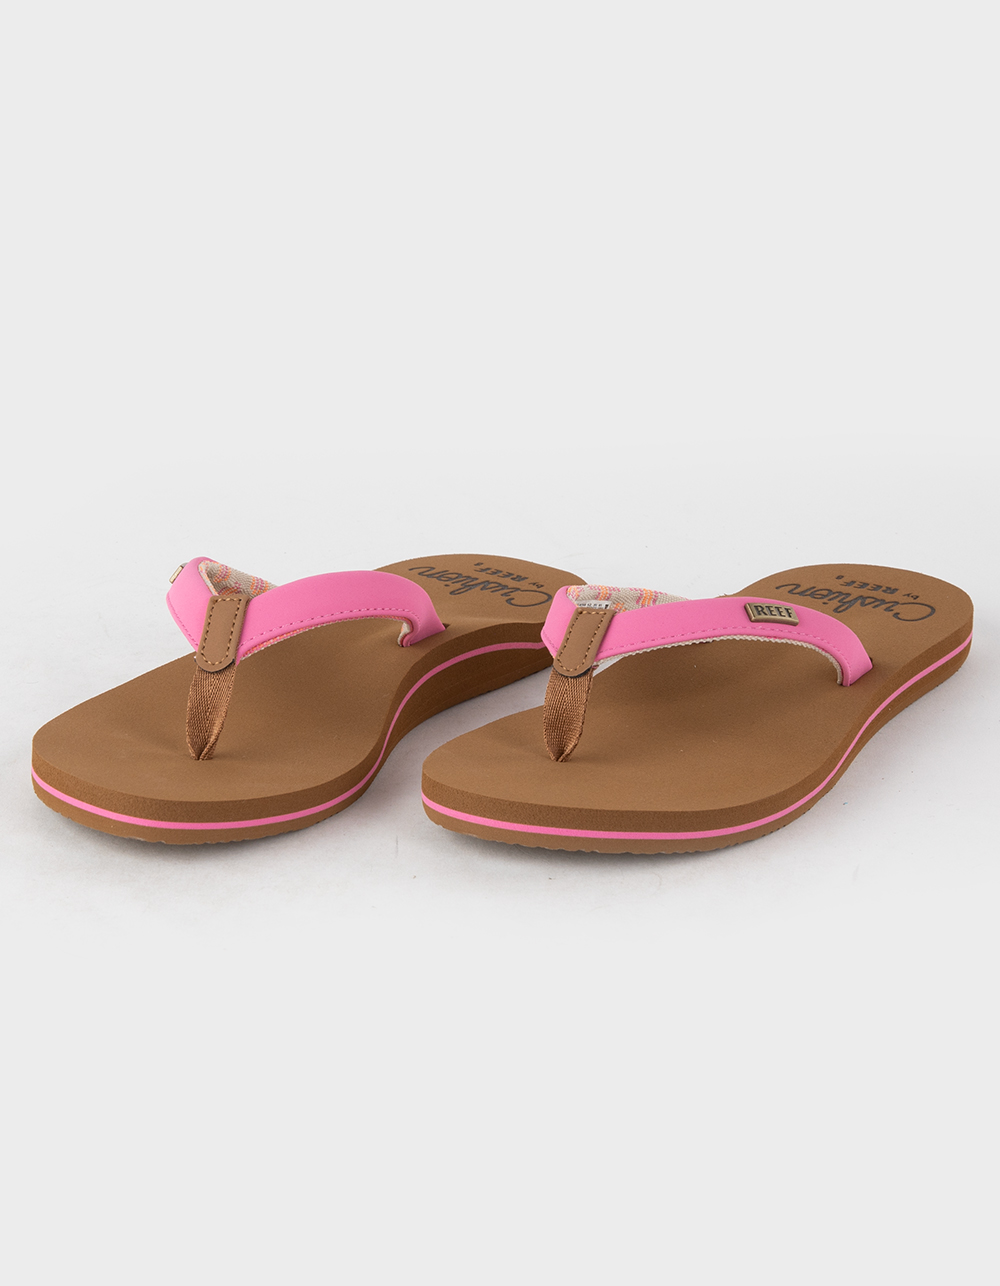 Reef Sandals & Clothing | Tillys